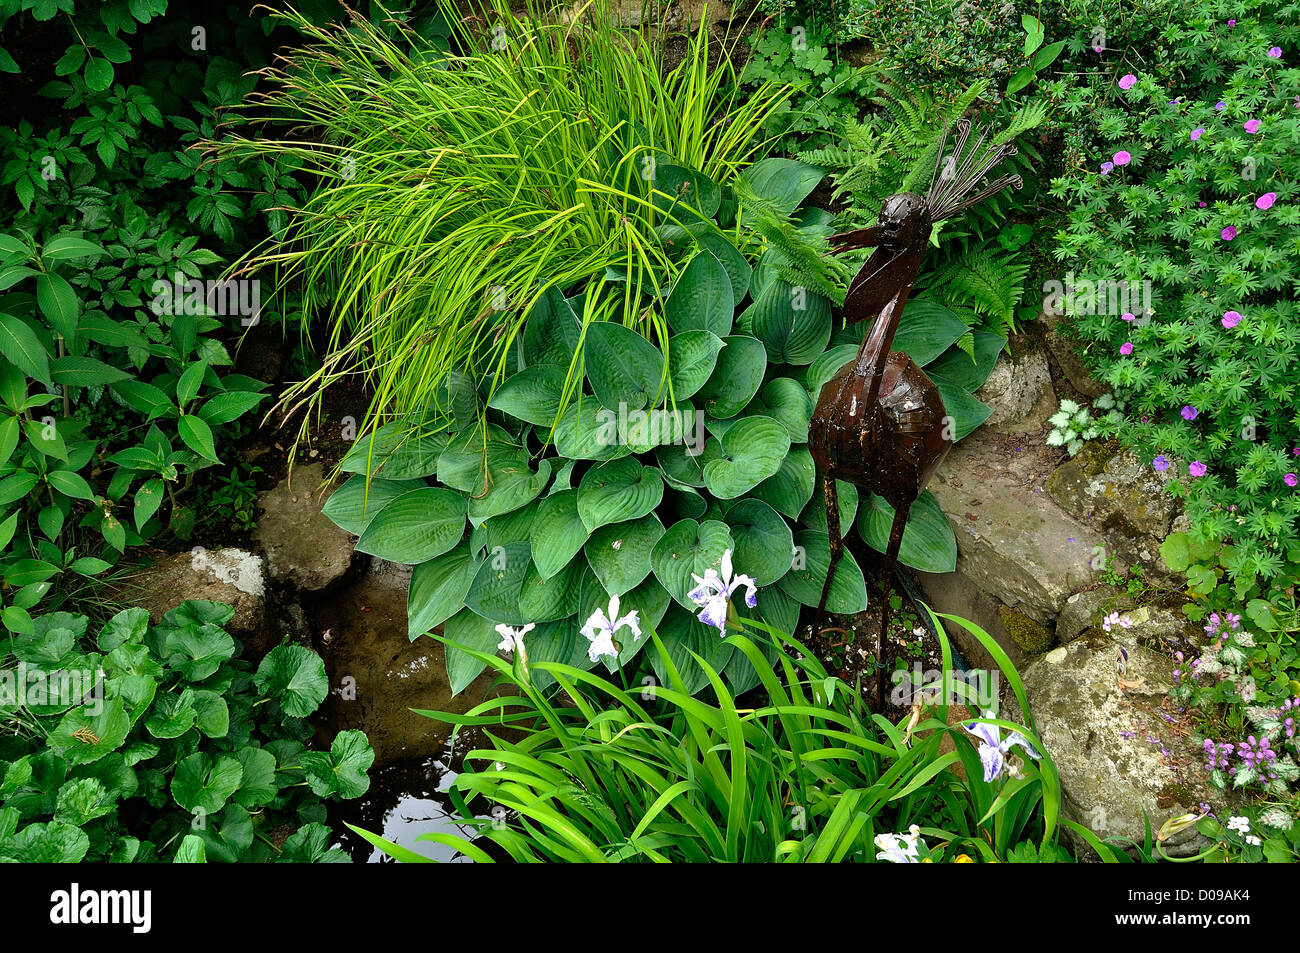 Pleasure garden, a basin with aquatic plants, hosta and decoration with a bird in metal. Stock Photo